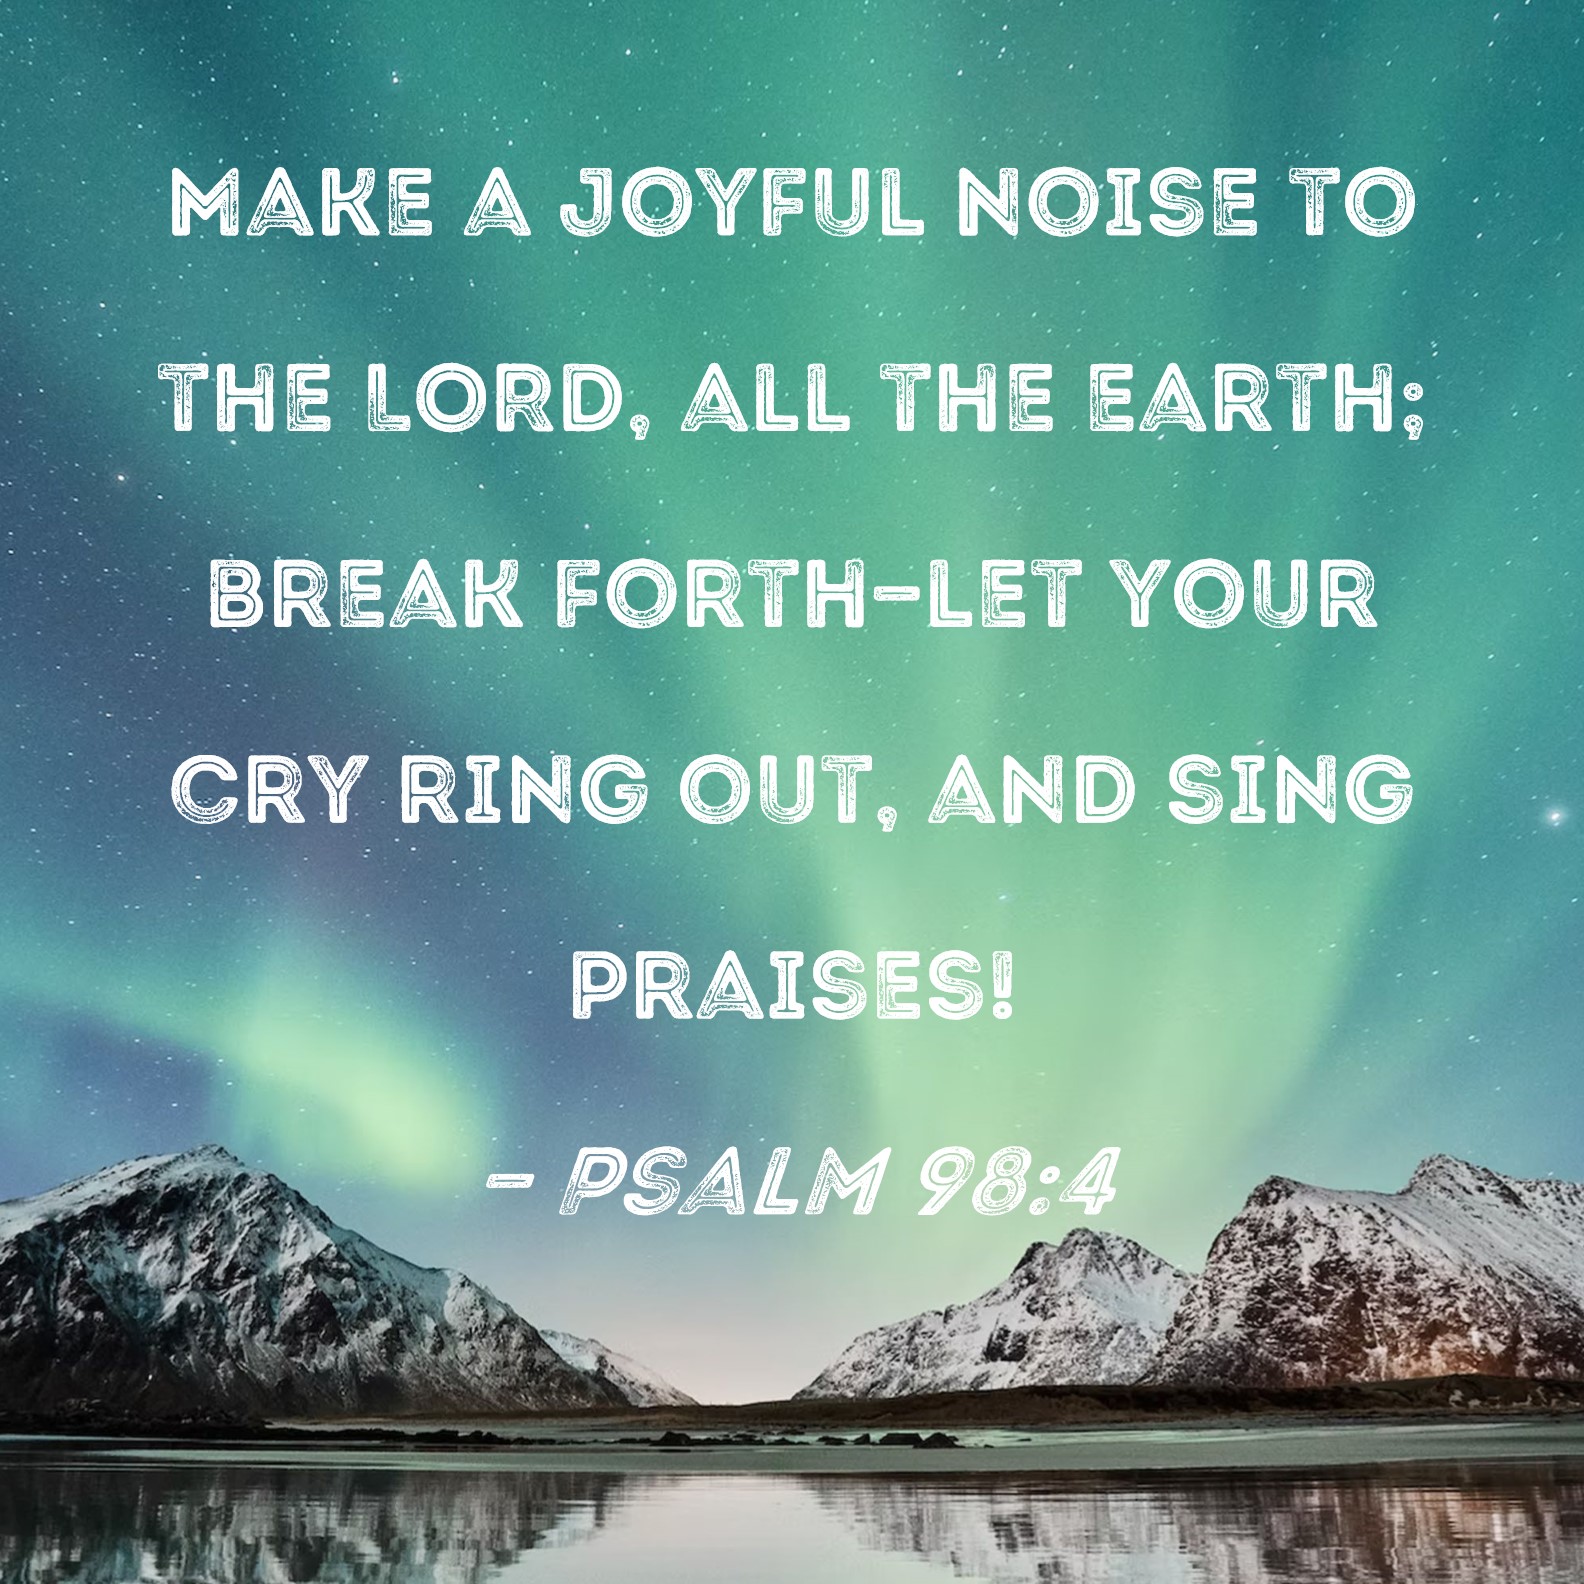 psalm-98-4-make-a-joyful-noise-to-the-lord-all-the-earth-break-forth-let-your-cry-ring-out